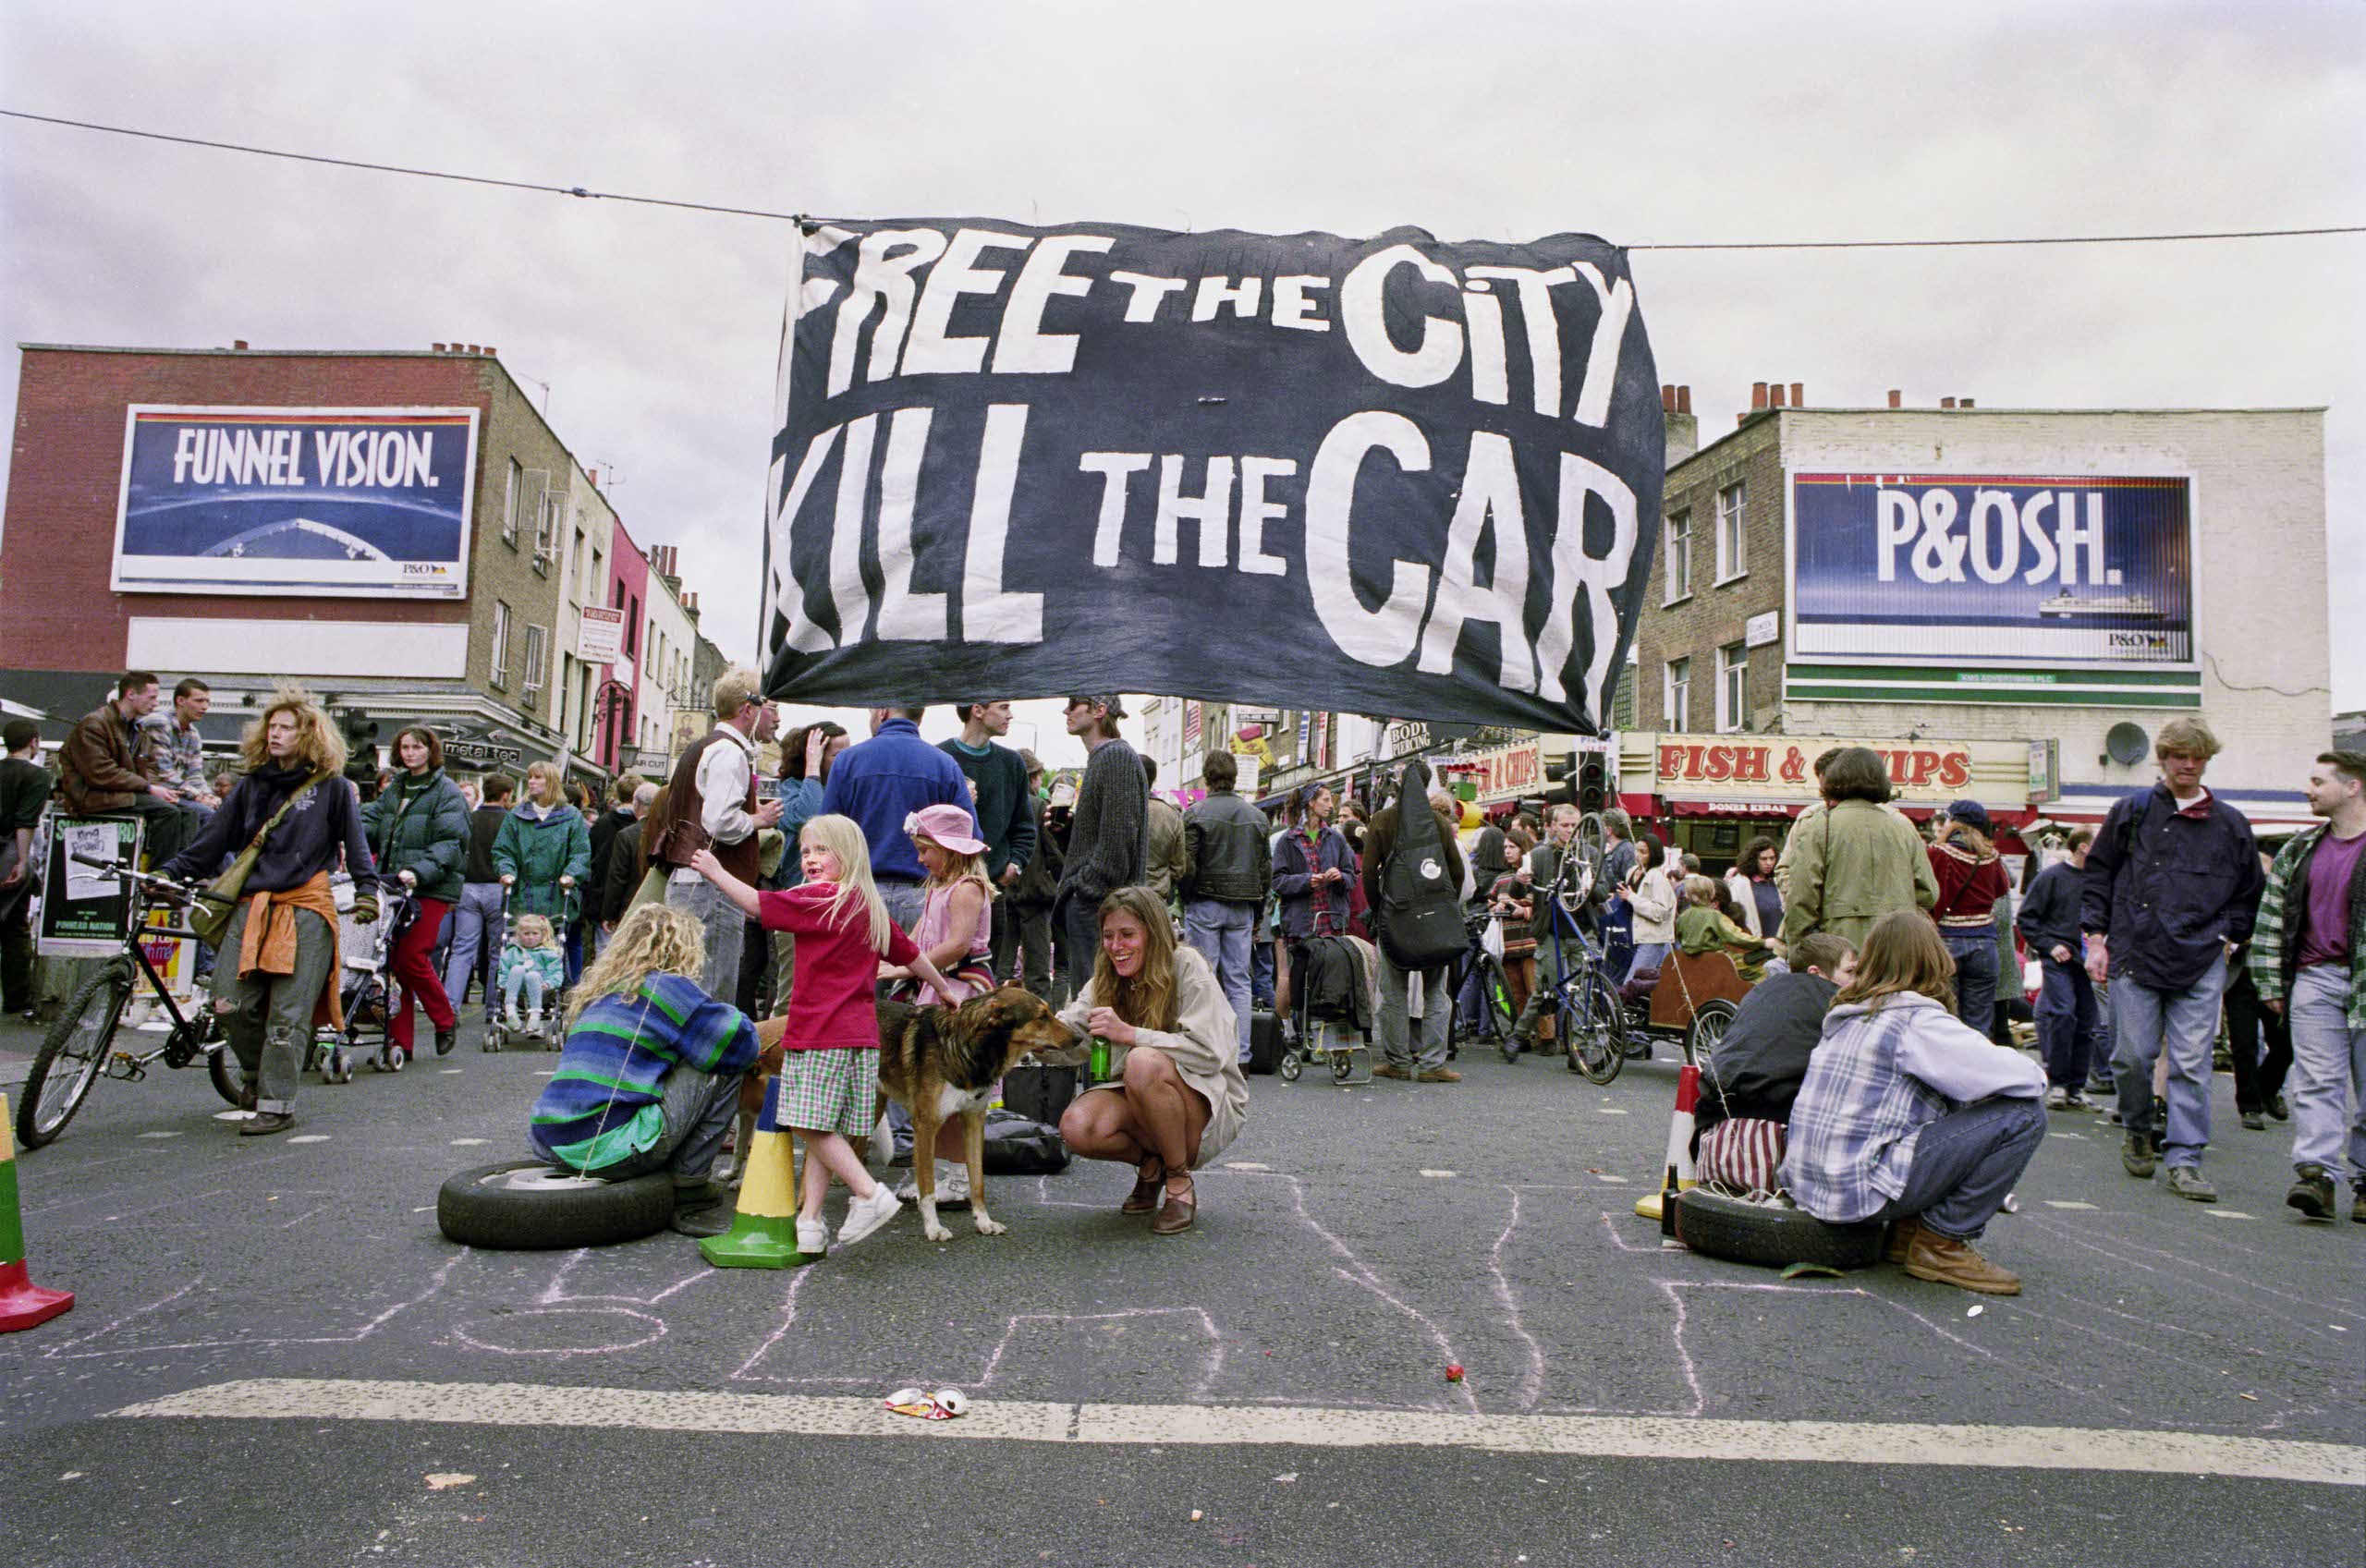 A large black and white banner hangs between buildings: Free the City, Kill the car. People sit in the road protesting and talking